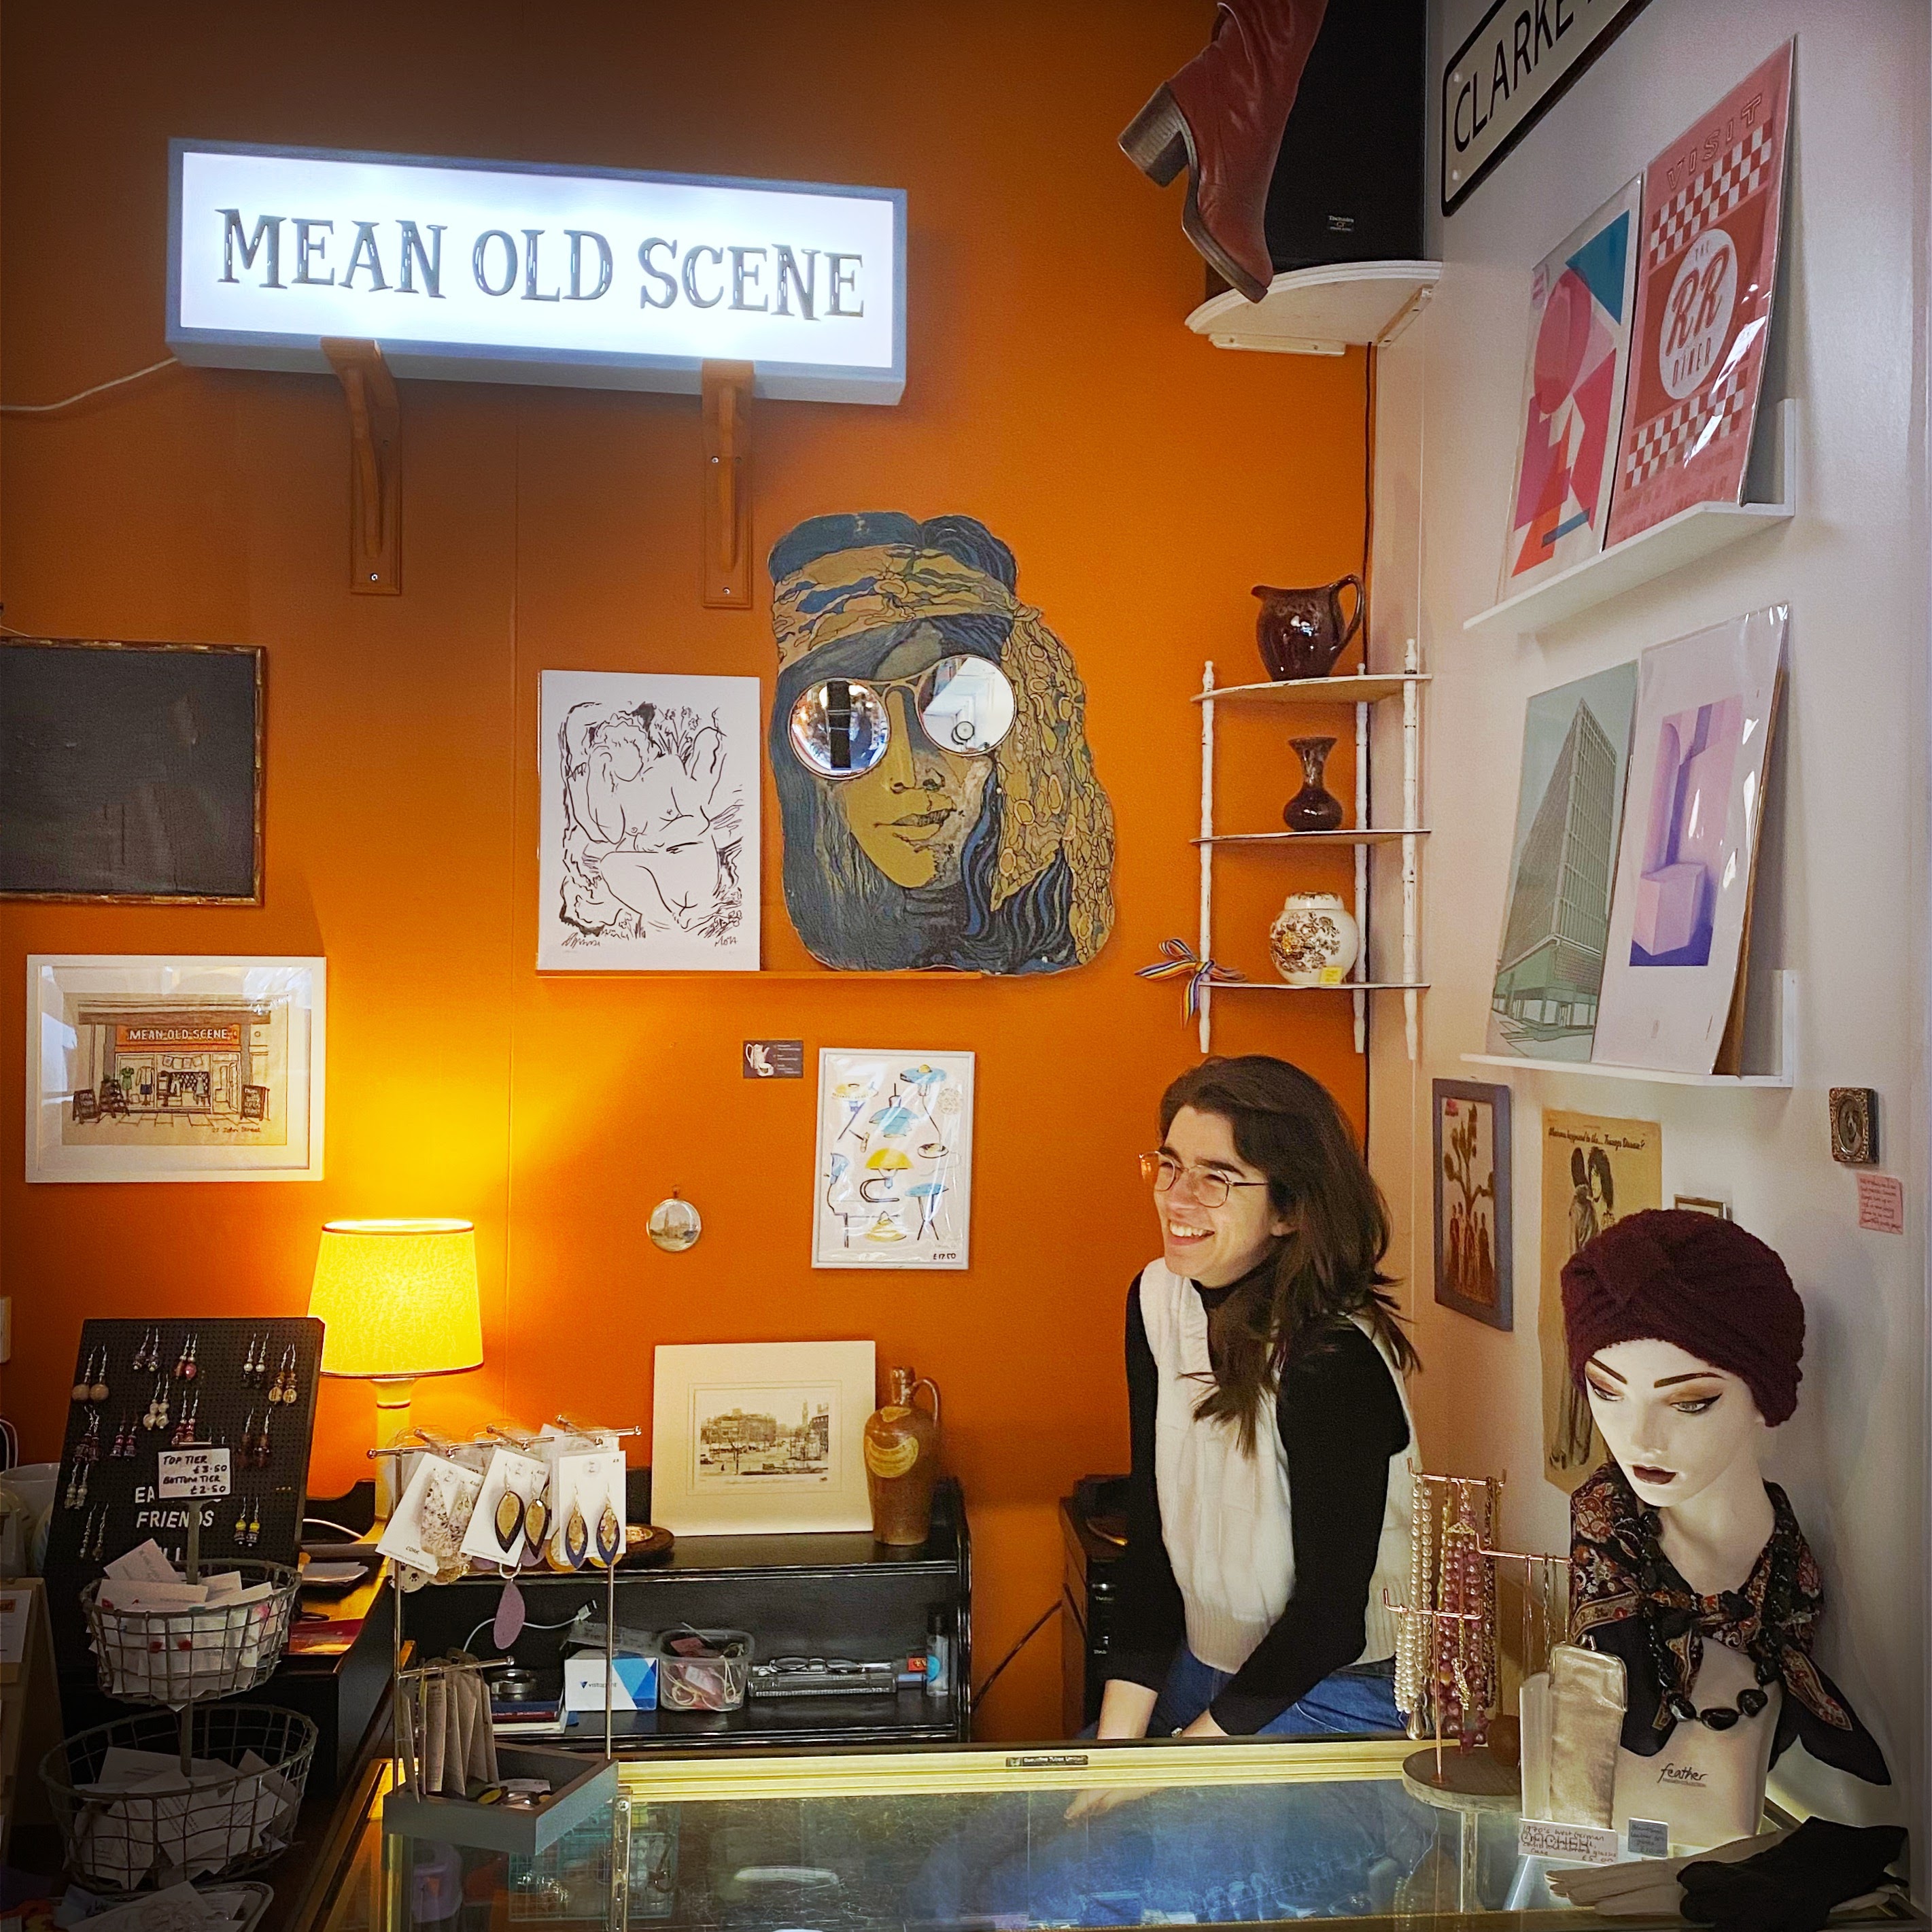 Photograph of a woman with dark hair smiling behind the counter of her store. Jewellery and artwork is on sale around her.